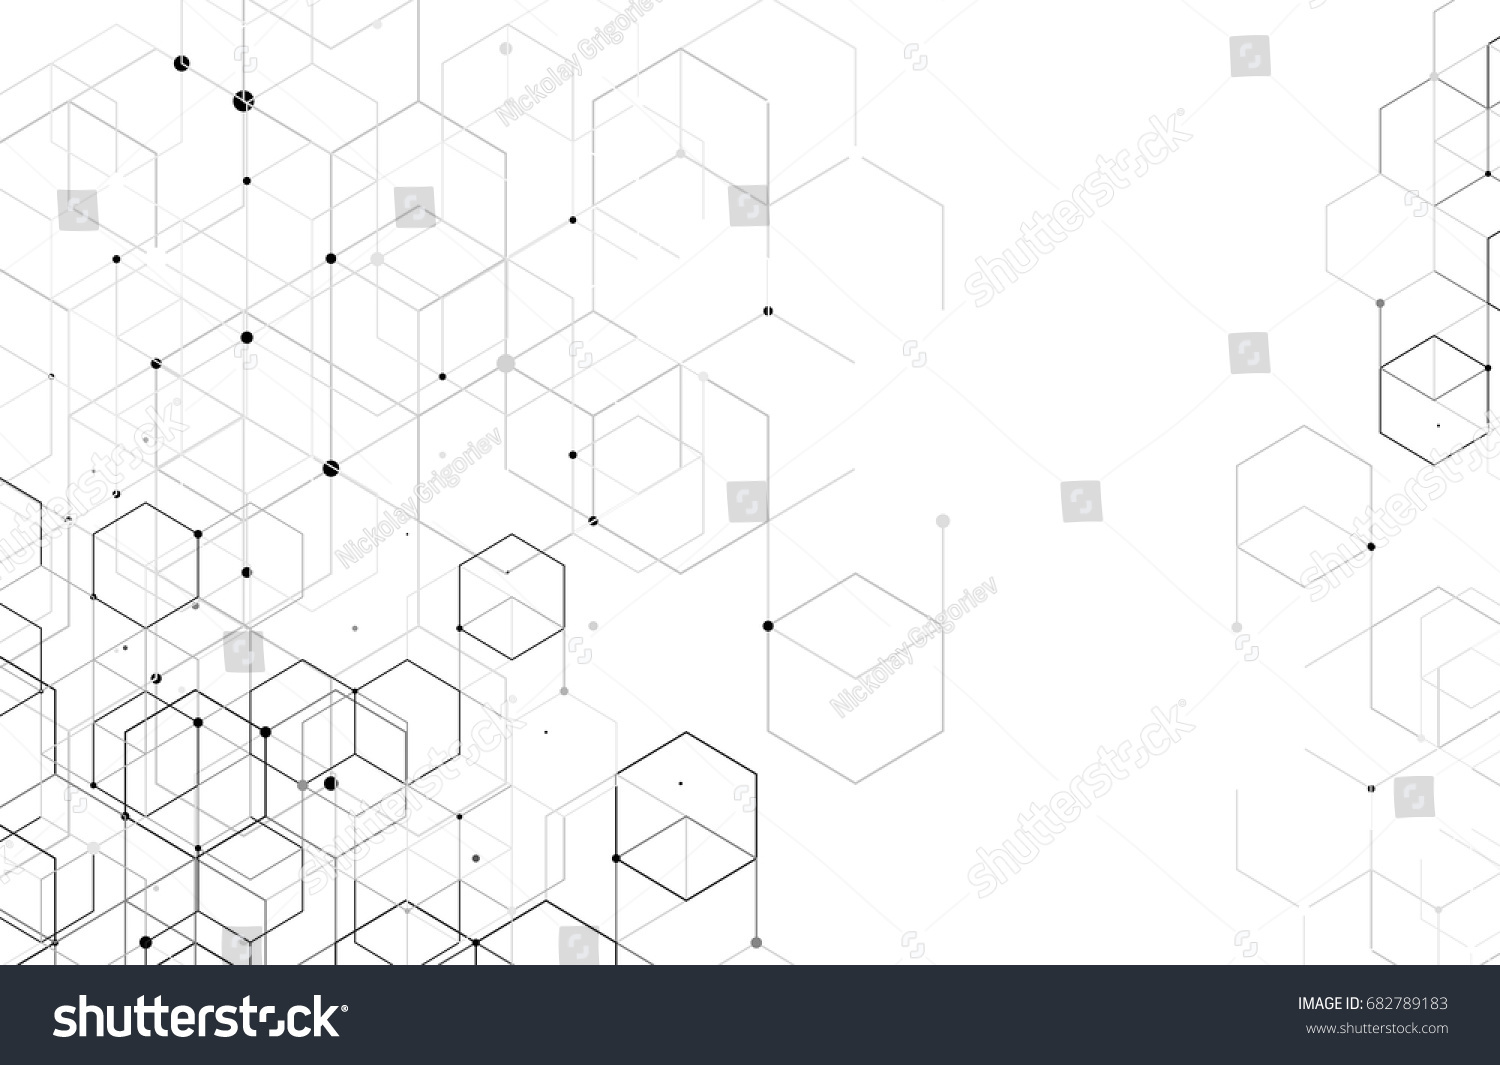 Vector abstract boxes background. Modern technology illustration with square mesh. Digital geometric abstraction with lines and points. Cube cell. #682789183